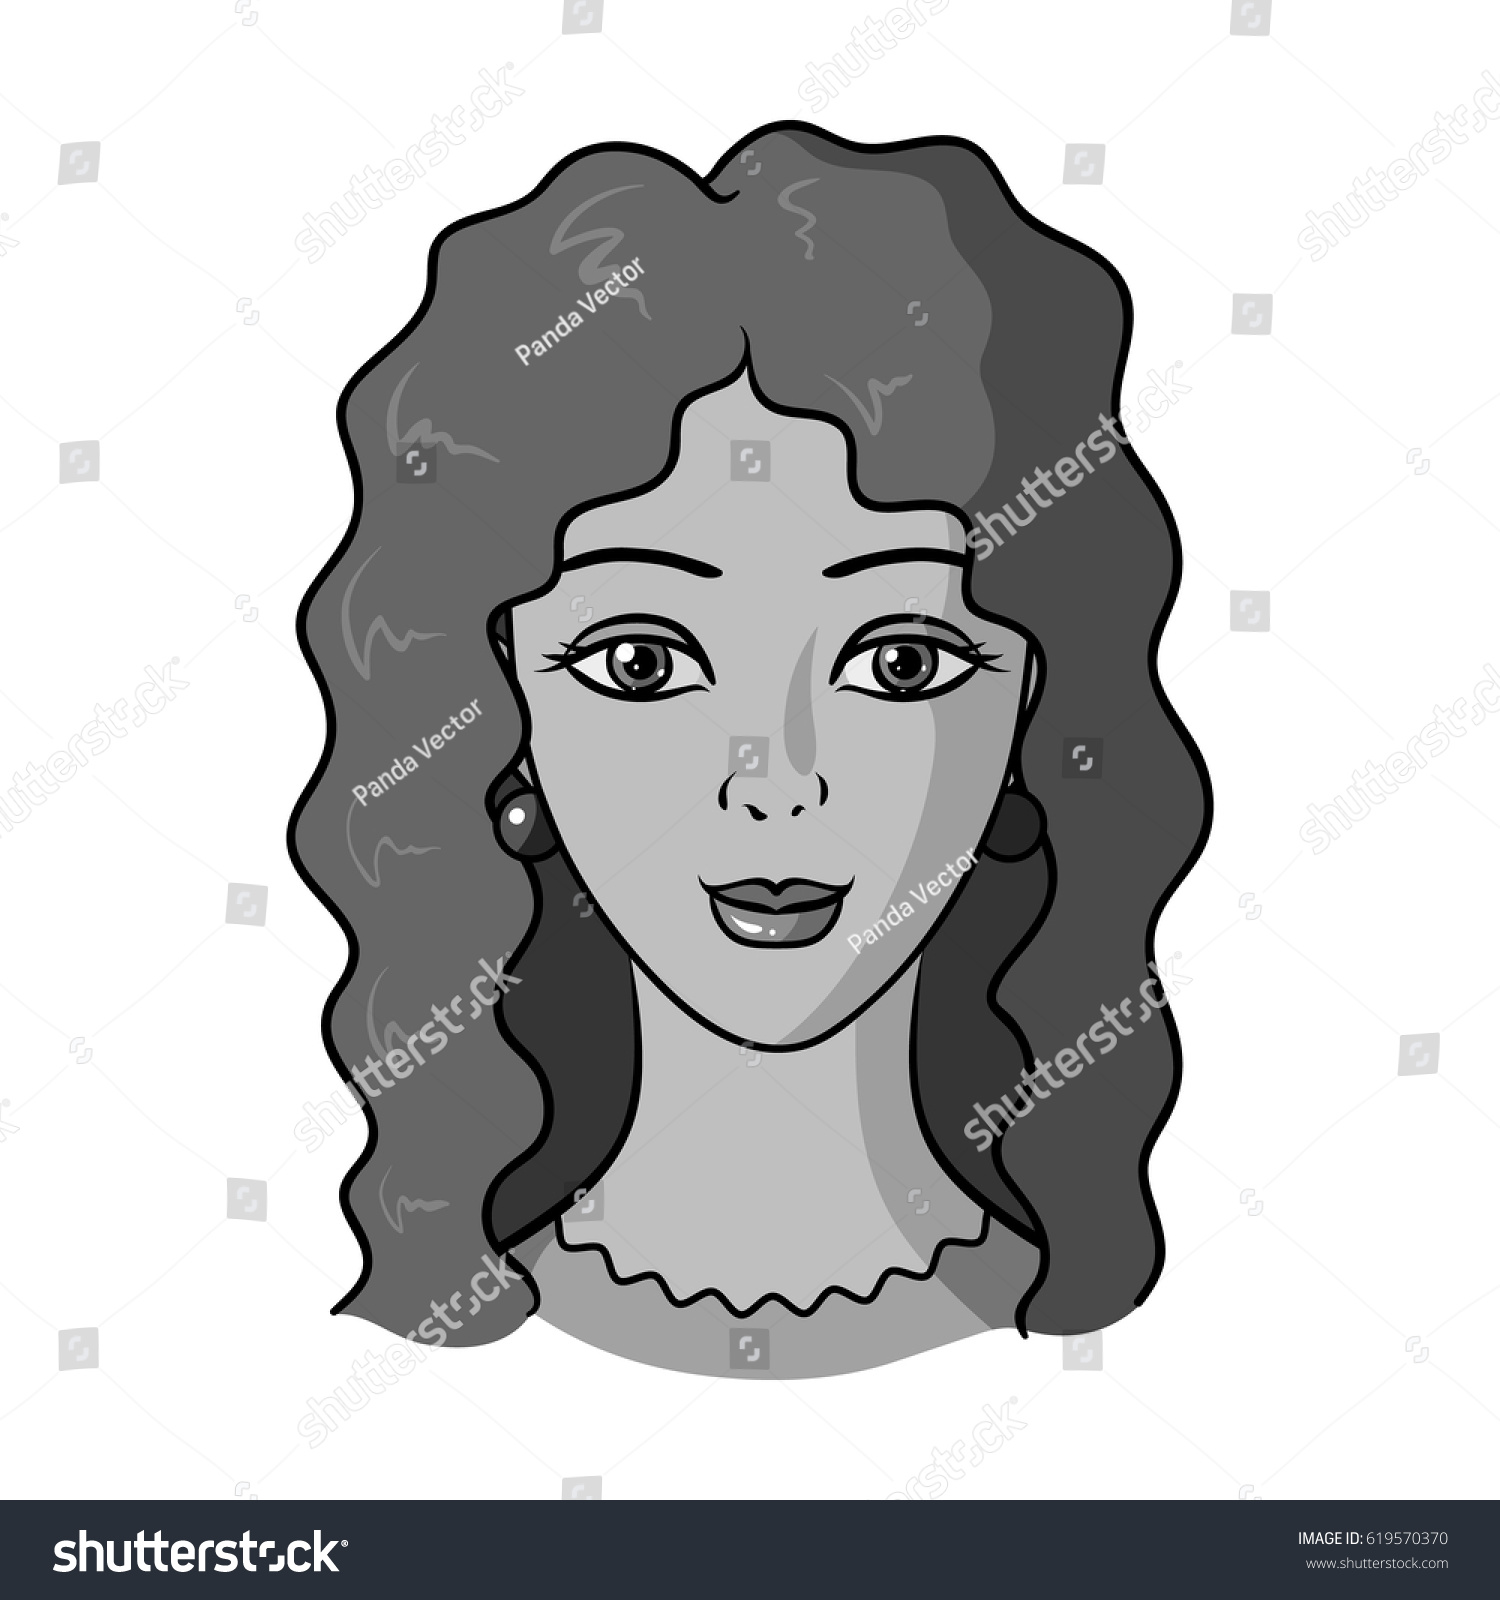 Avatar Of A Woman With Curly Hairavatar And Royalty Free Stock